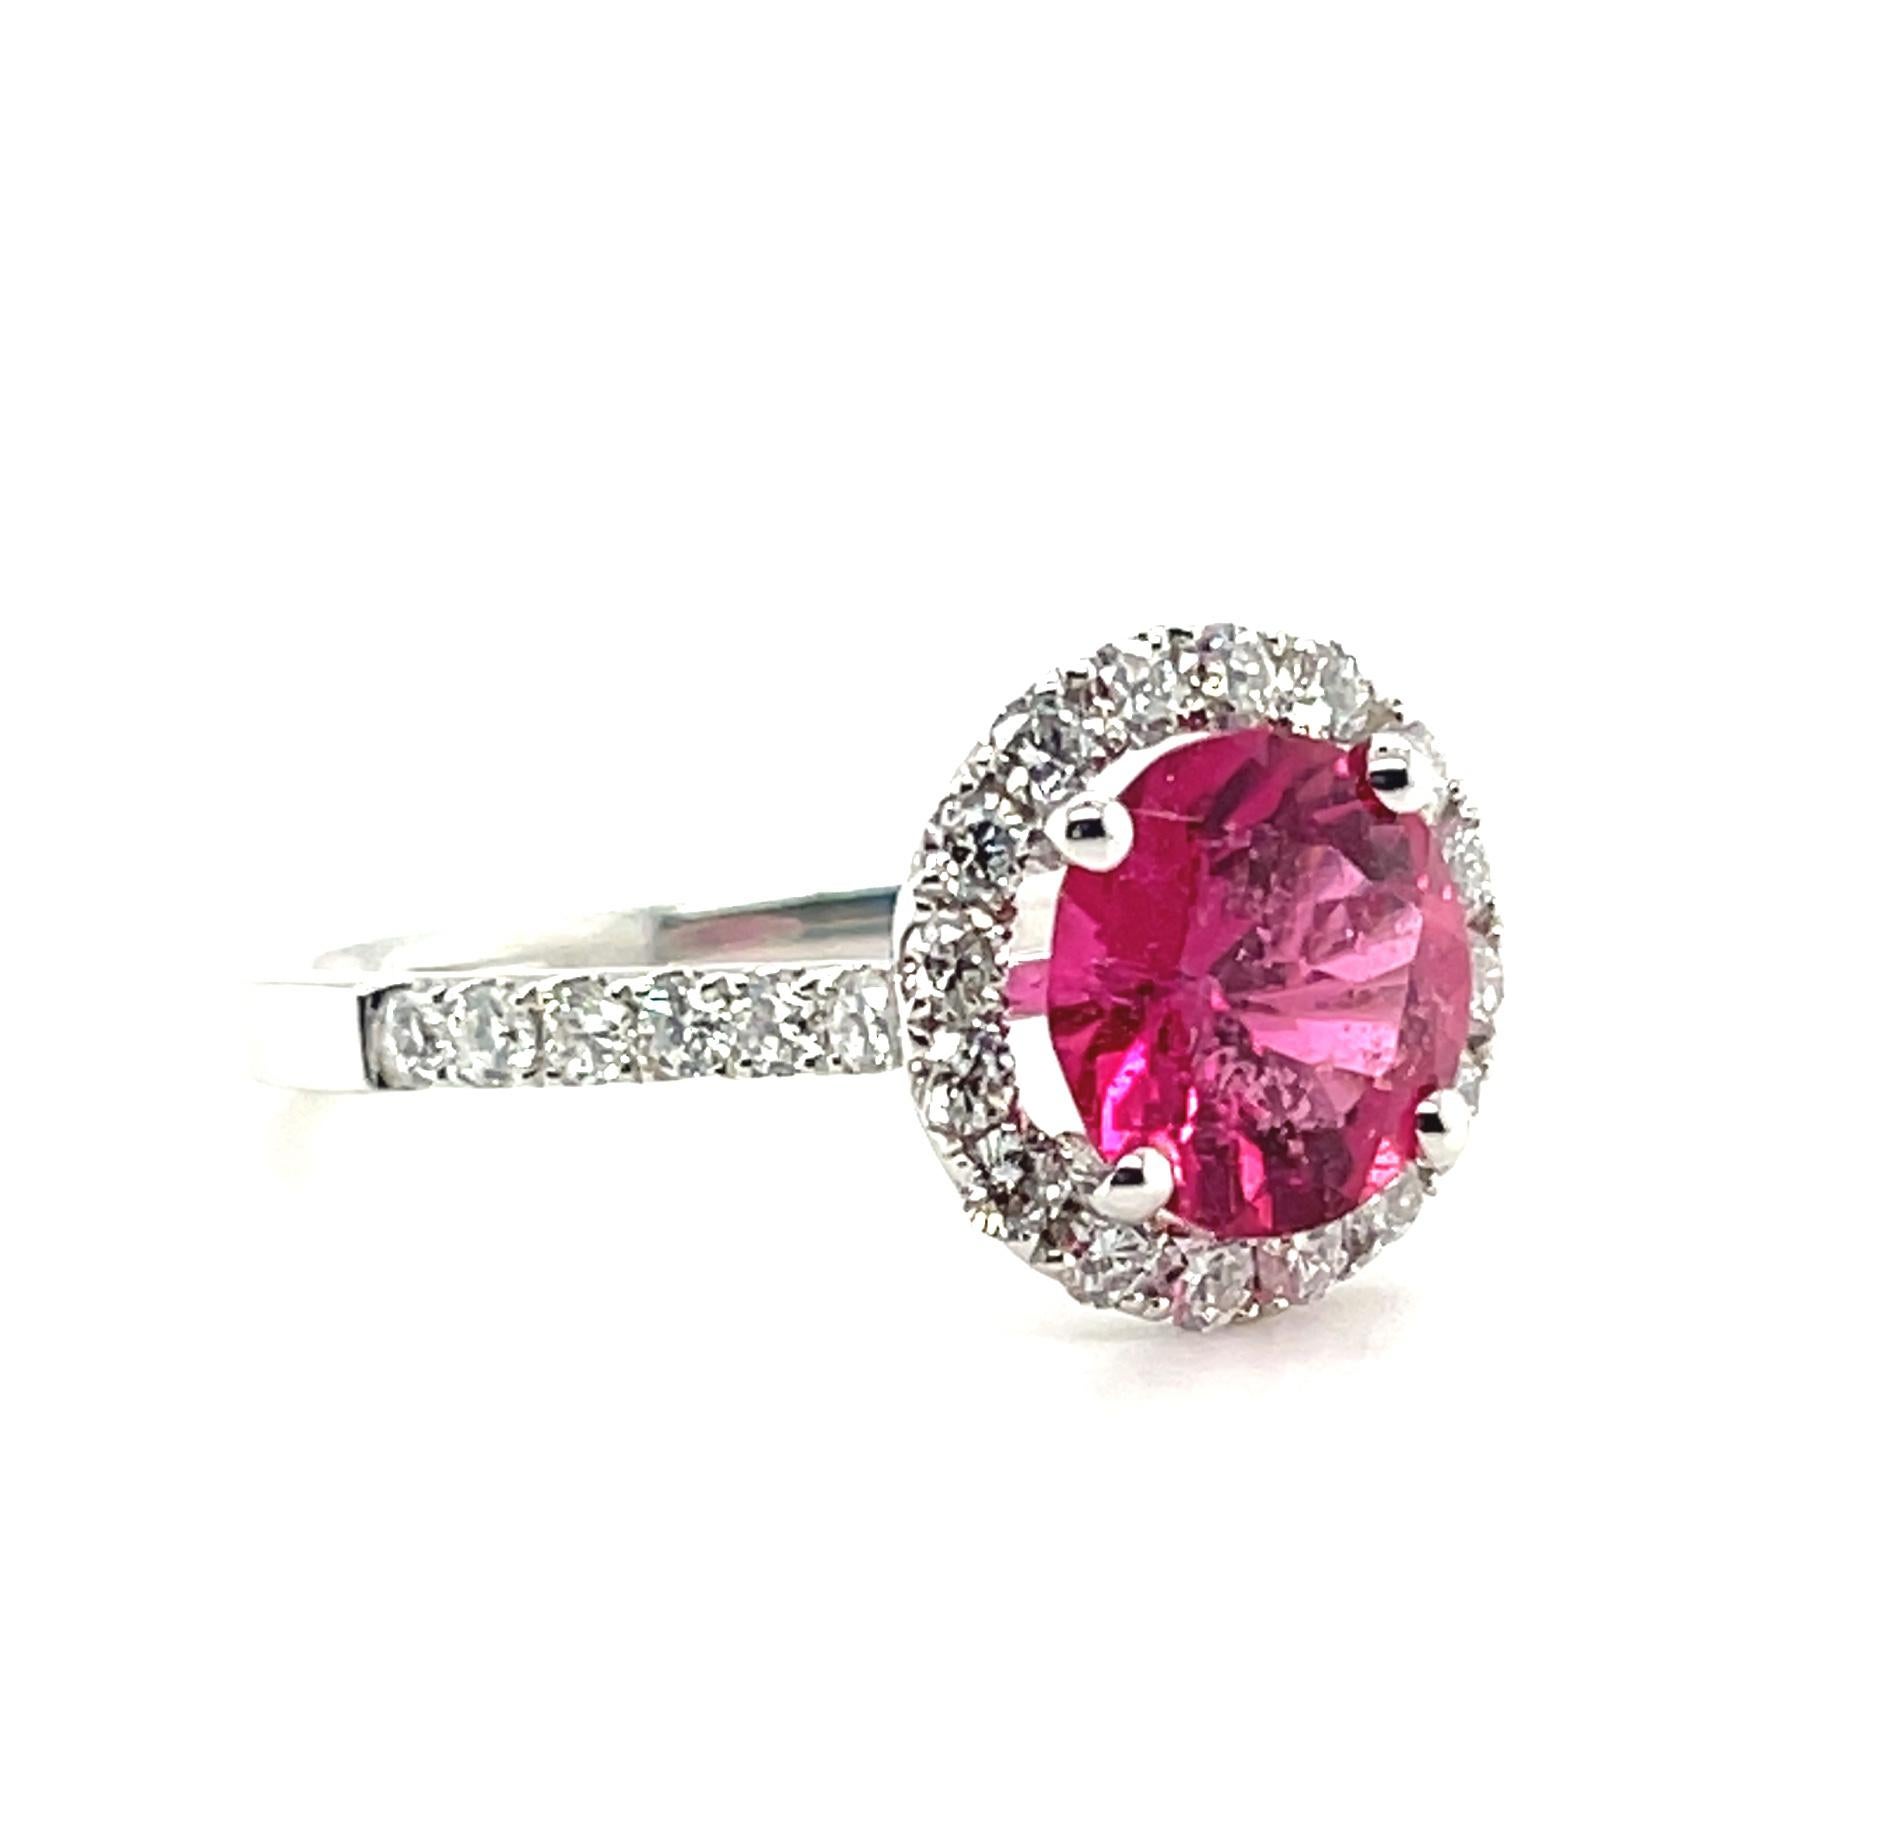 This beautifully designed ring features a lovely pink tourmaline gemstone surrounded by a halo of brilliant white diamonds! The pink tourmaline weighs 1.84 carats and has a gorgeous bubblegum pink color and exceptional brilliance. Sparkling diamonds